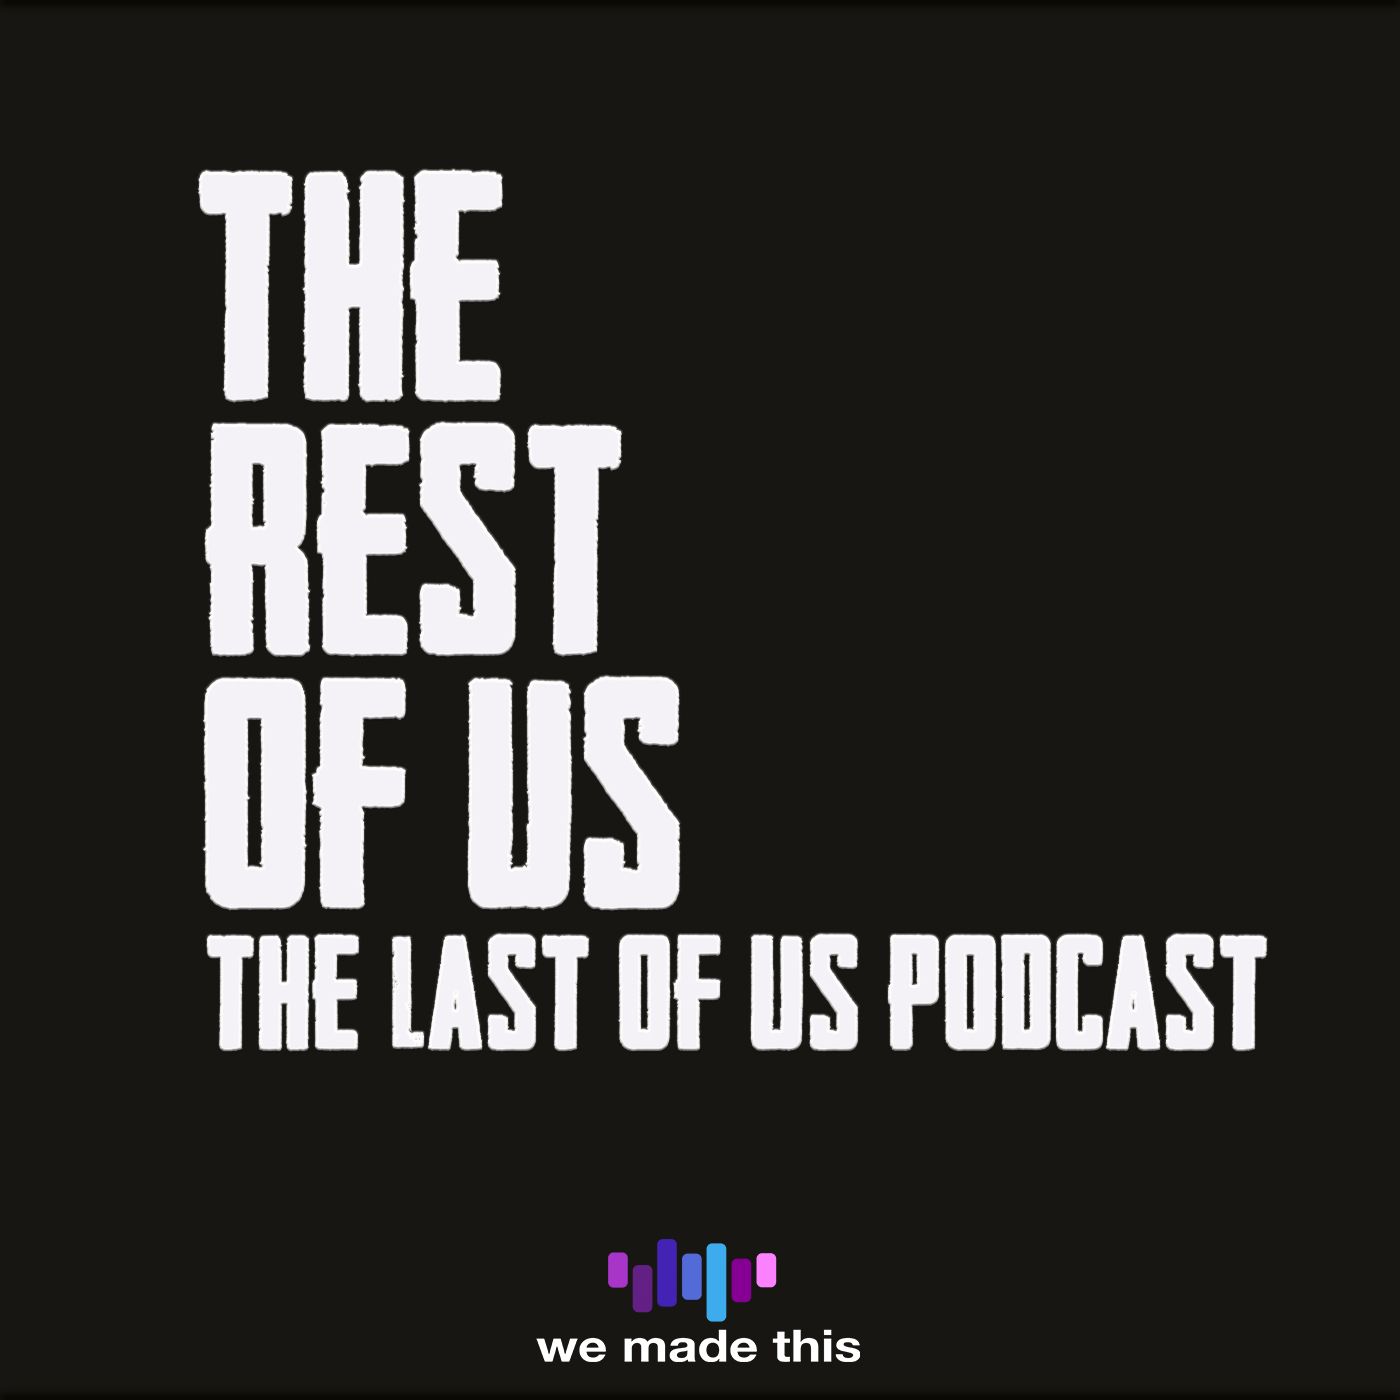 The Official The Last of Us Podcast - Podcast